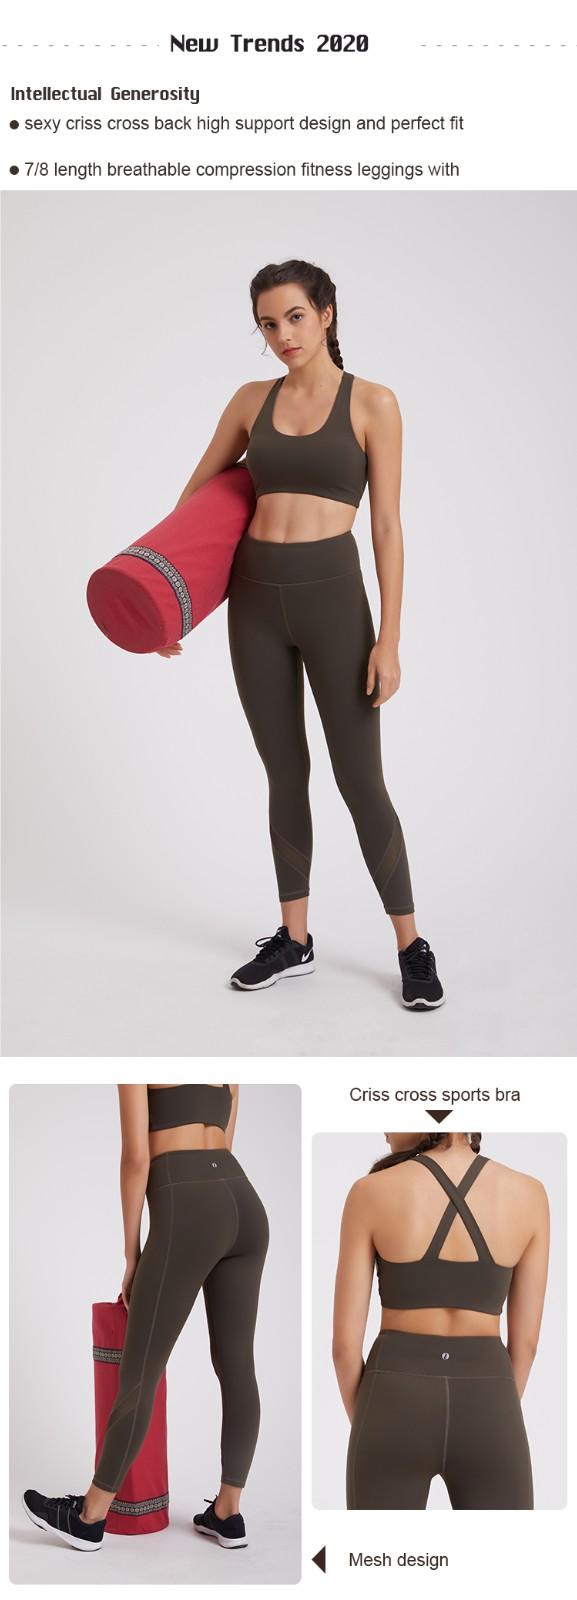 INGOR cute yoga outfits owner for sport